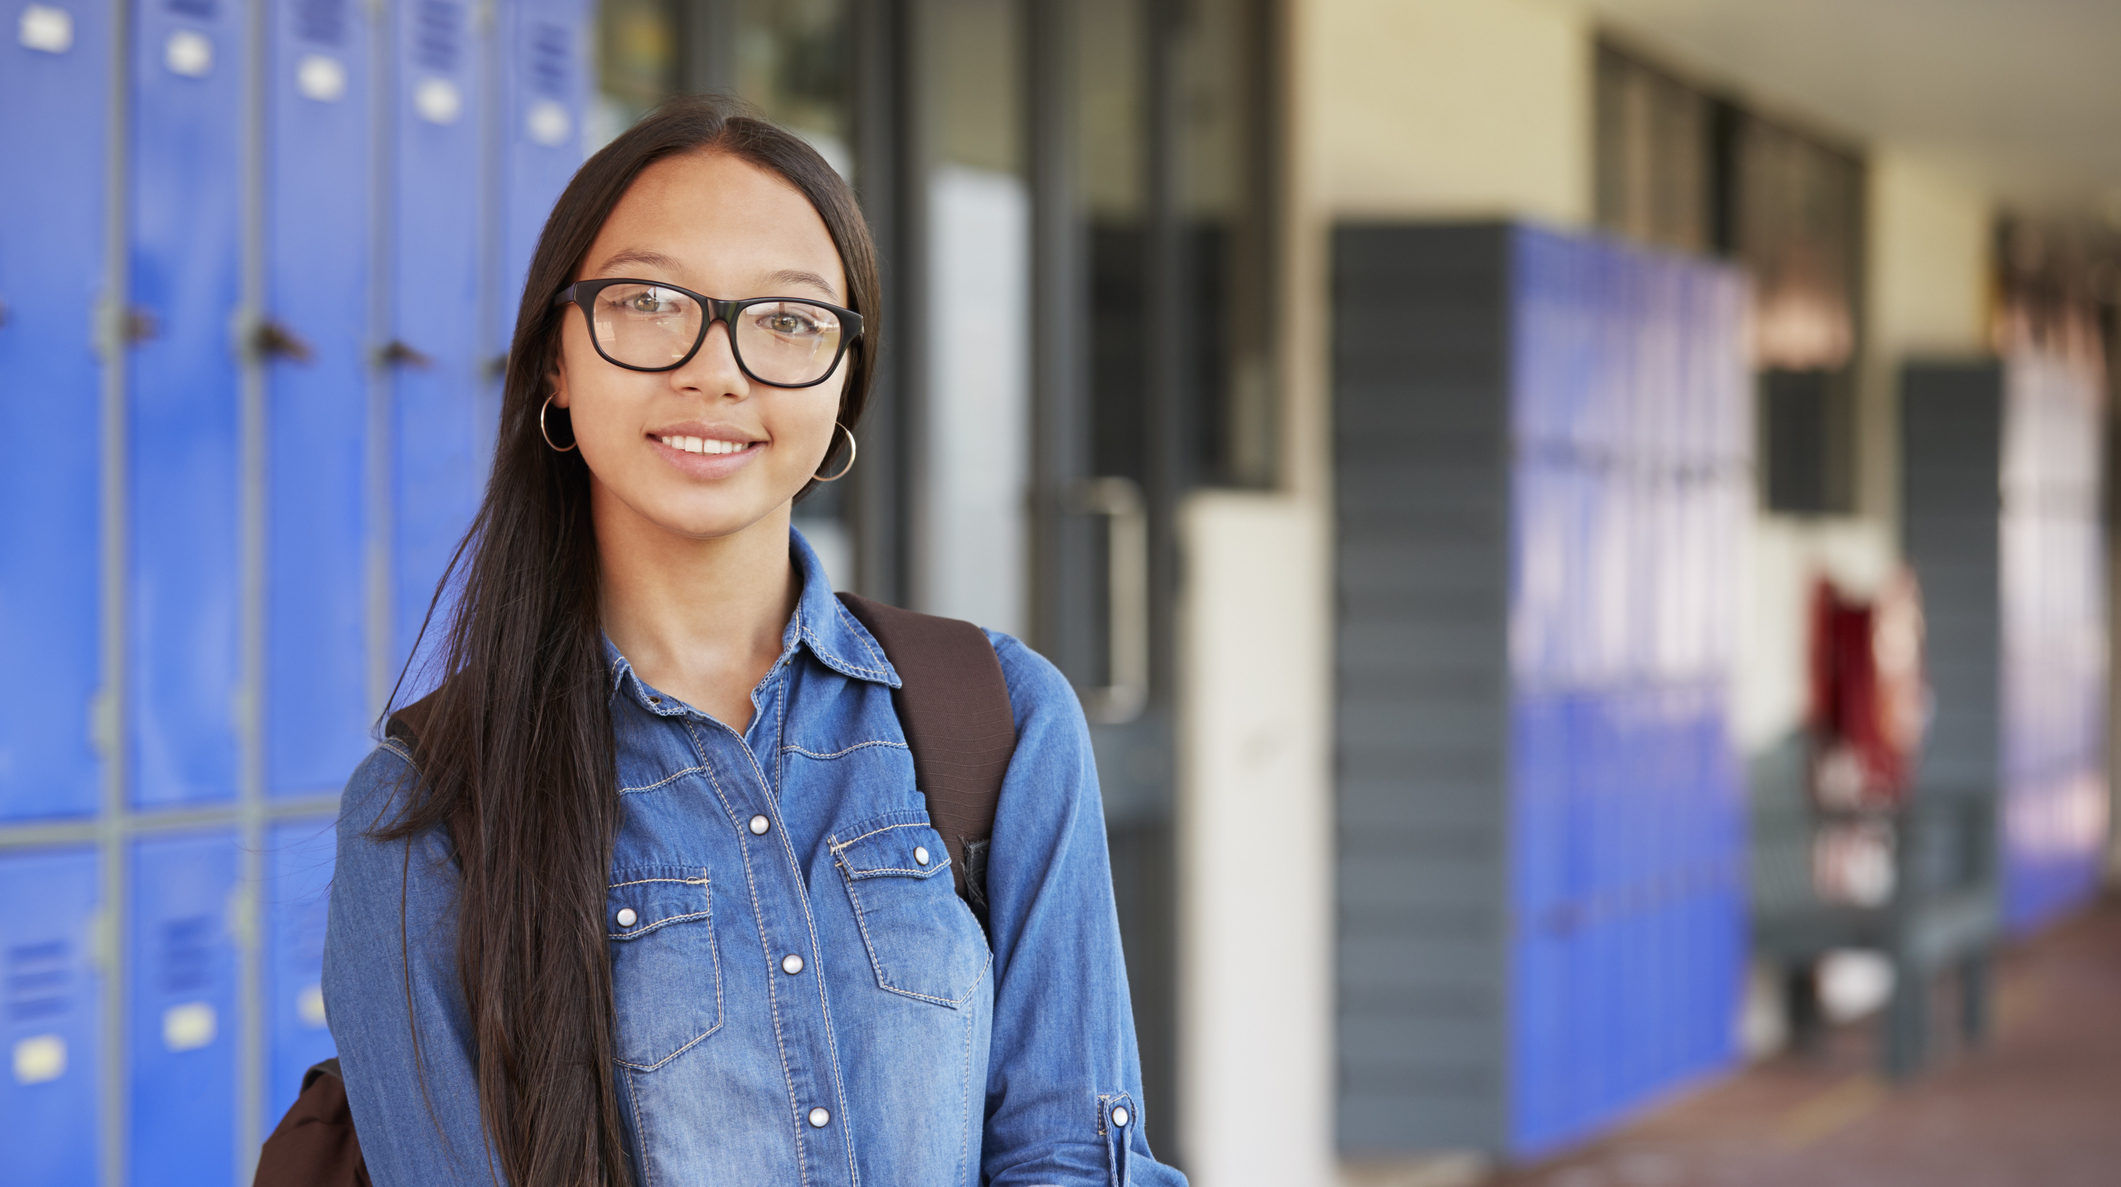 An adolescent girl wearing glasses and a backpack smiles in front of a set of lockers at school.